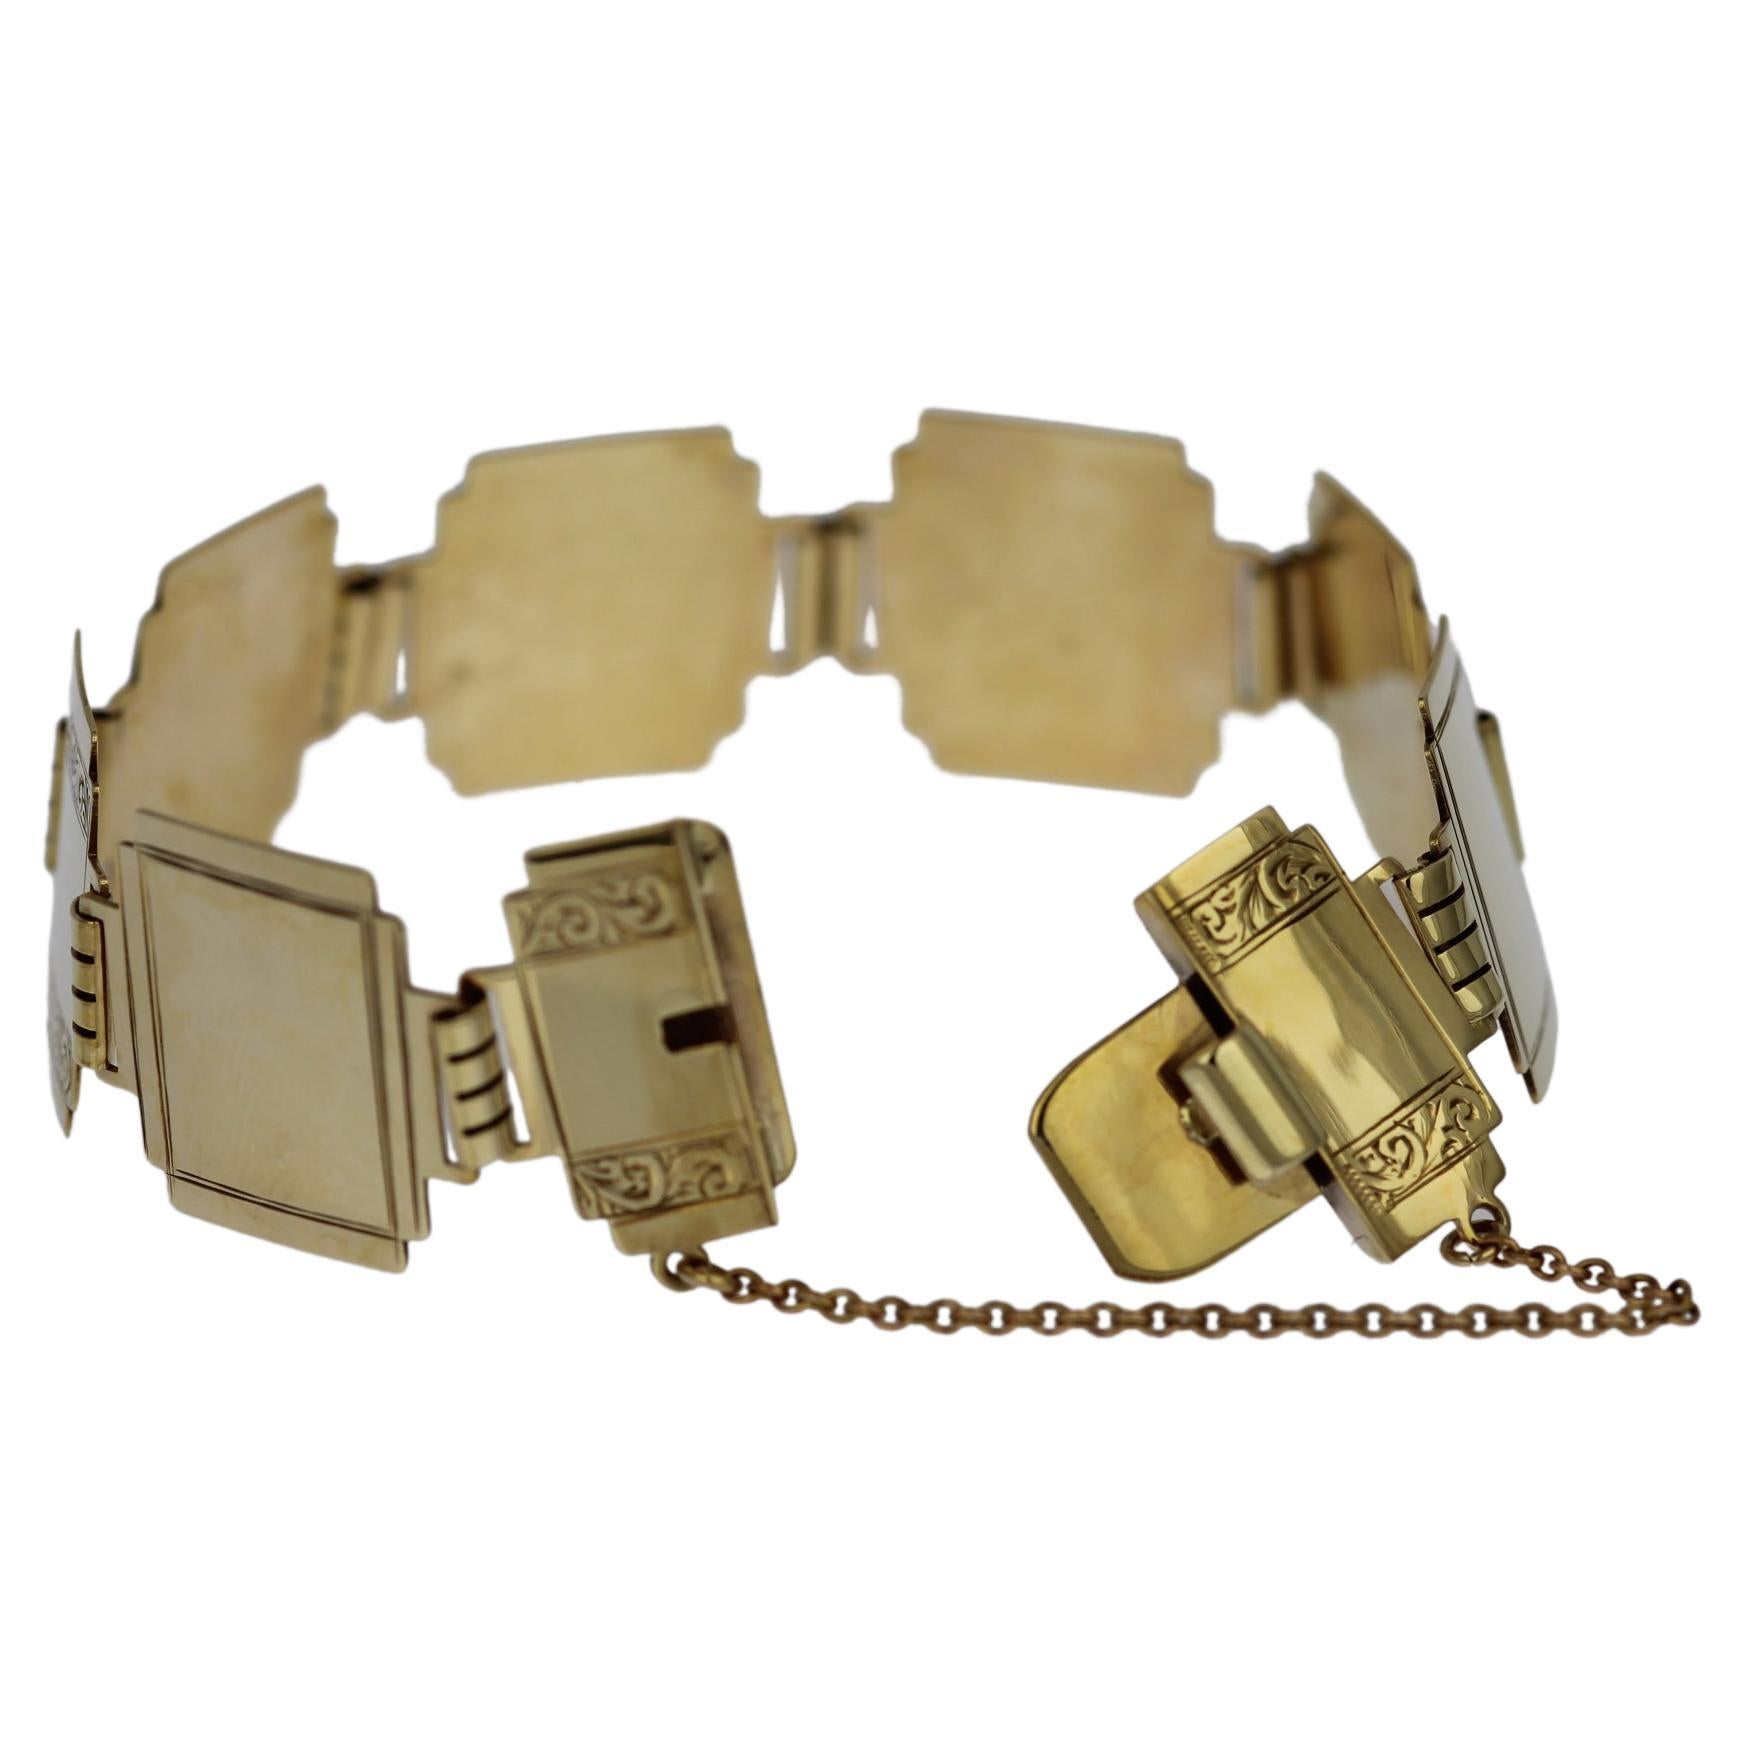 Art deco 9ct yellow gold bracelet featuring 8 decorative polished stepped squares joined with quadruple jointed decorative hinges.

Every other square plate features a twin side stripe of scrolled engraving.

Each square plate measures 18.9mm across